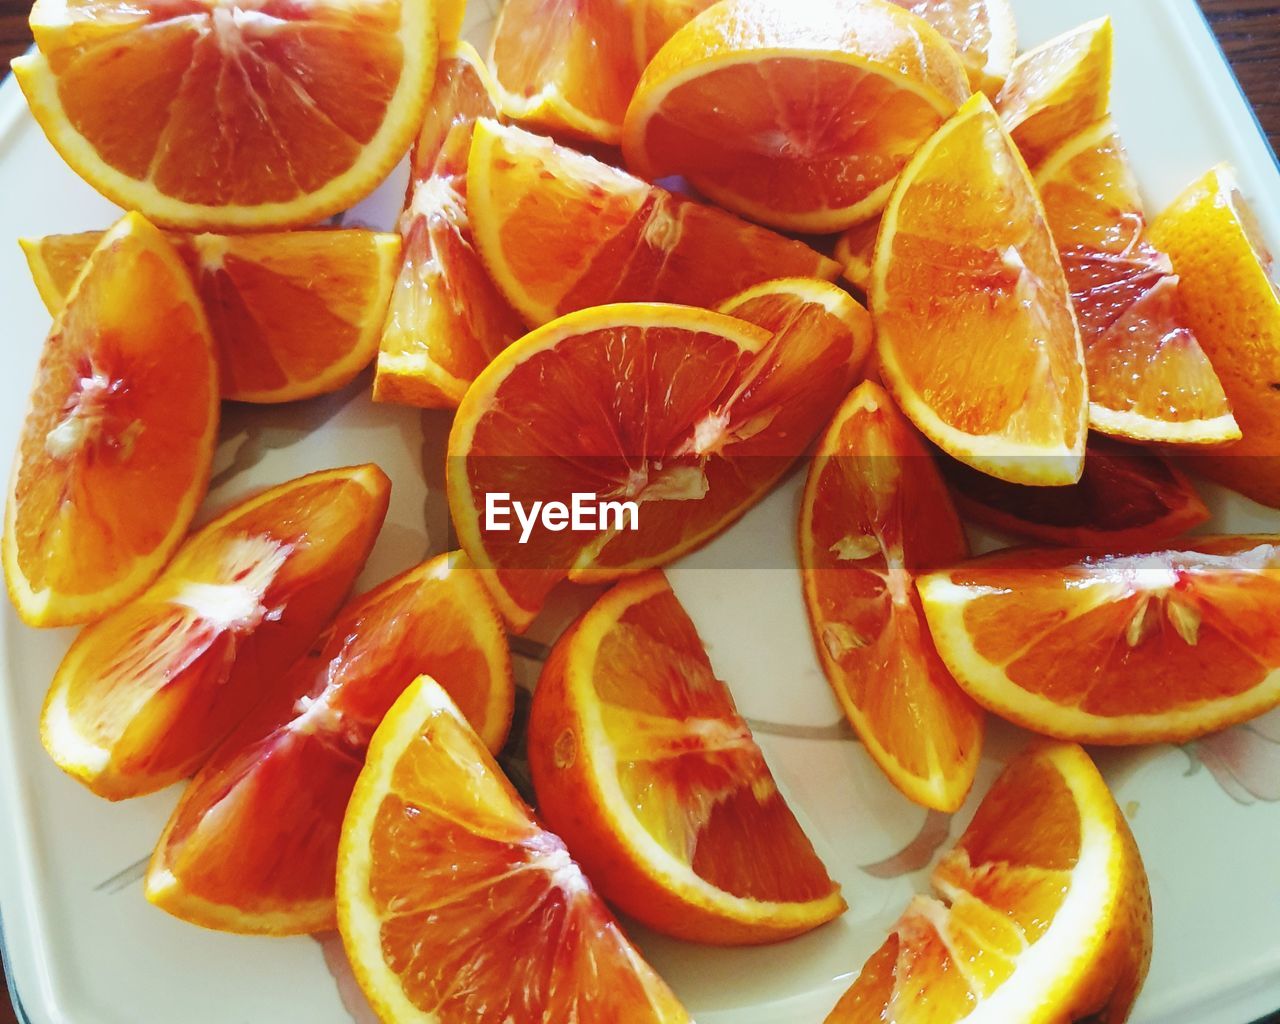 Blood oranges from pakistan